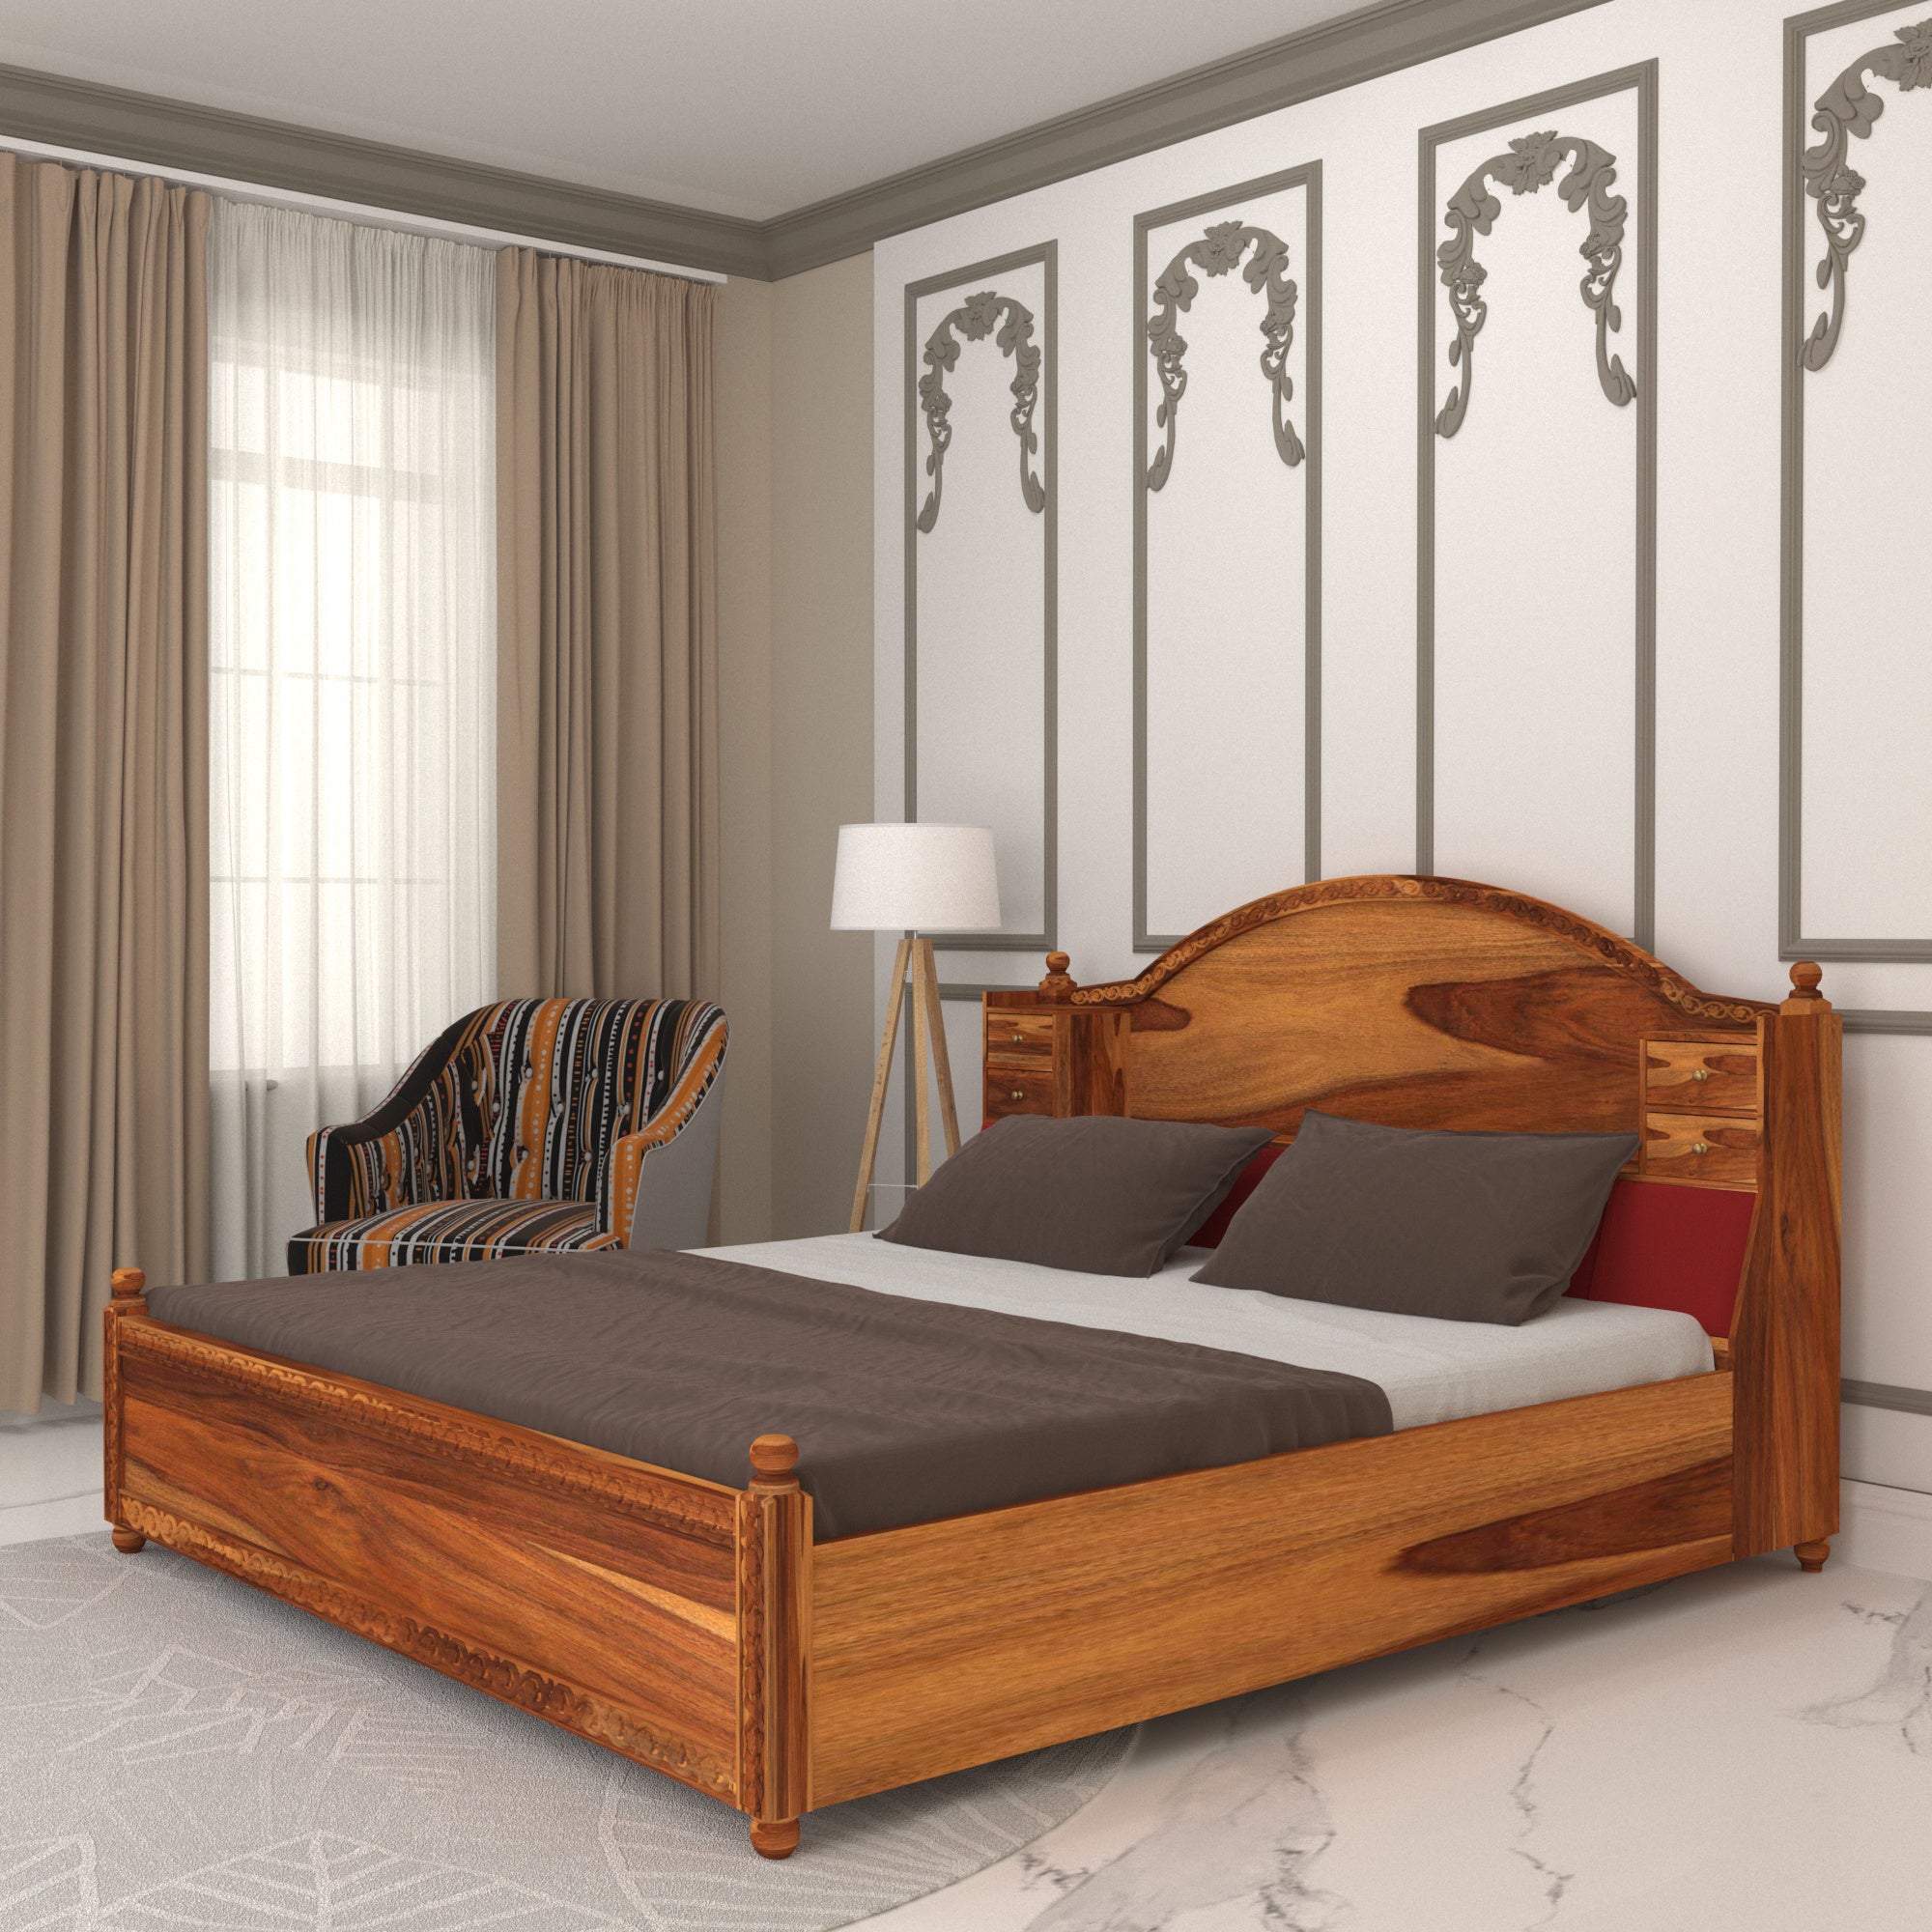 Sheesham wood Traditional Storage Bed Bed